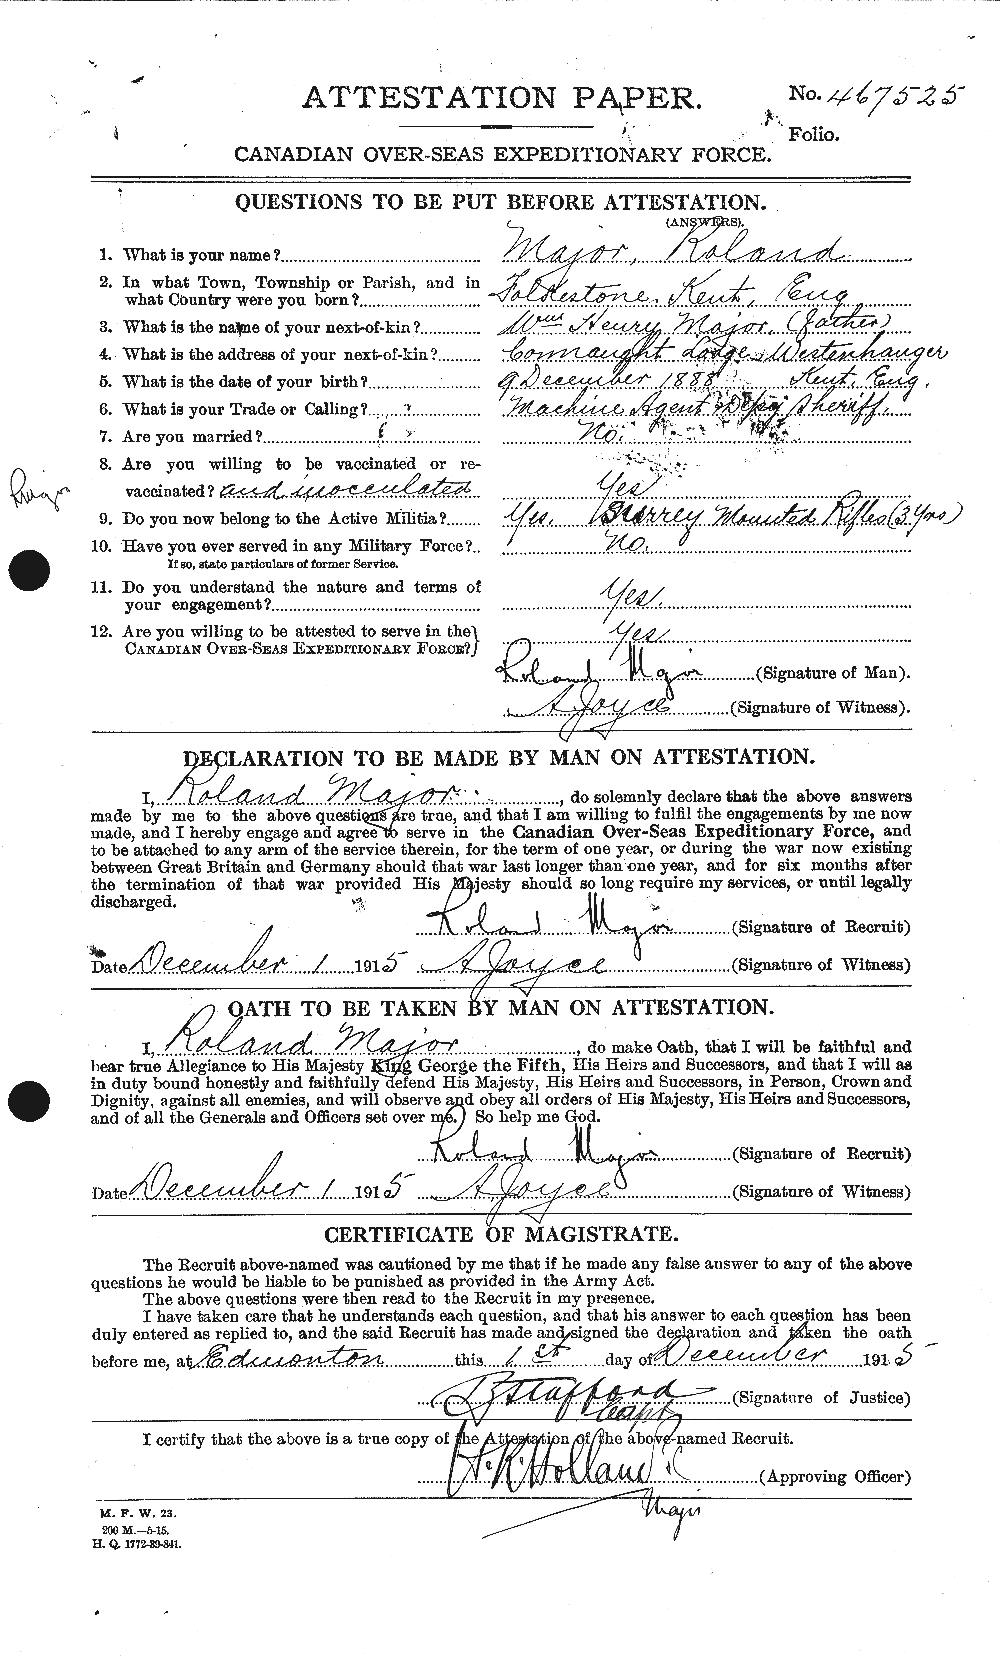 Personnel Records of the First World War - CEF 477899a